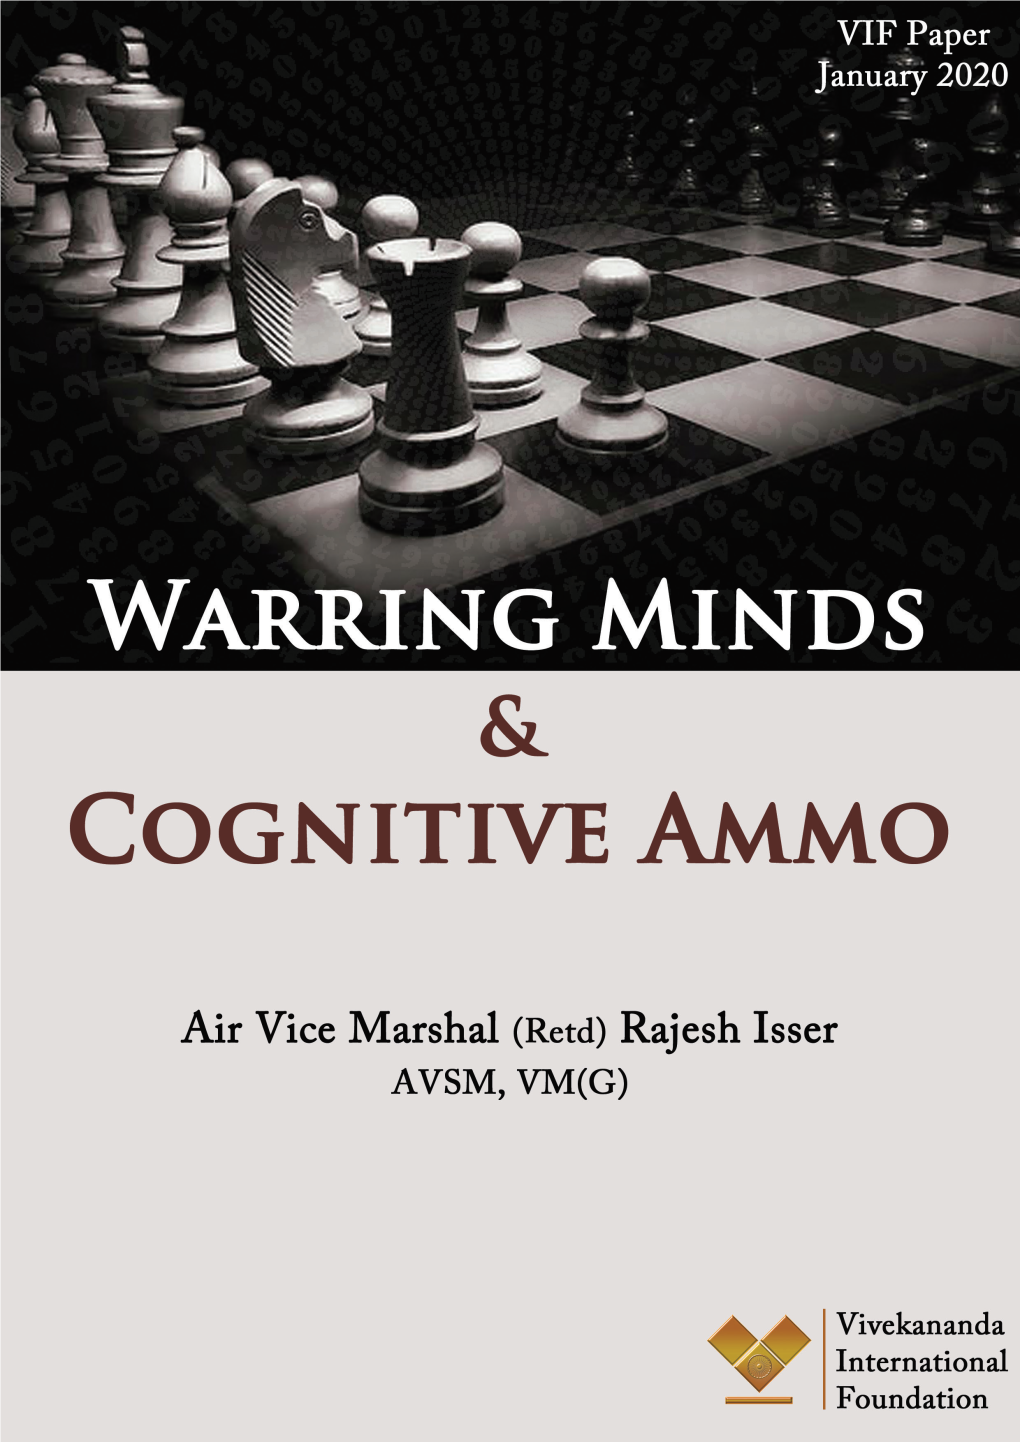 Warring Minds & Cognitive Ammo